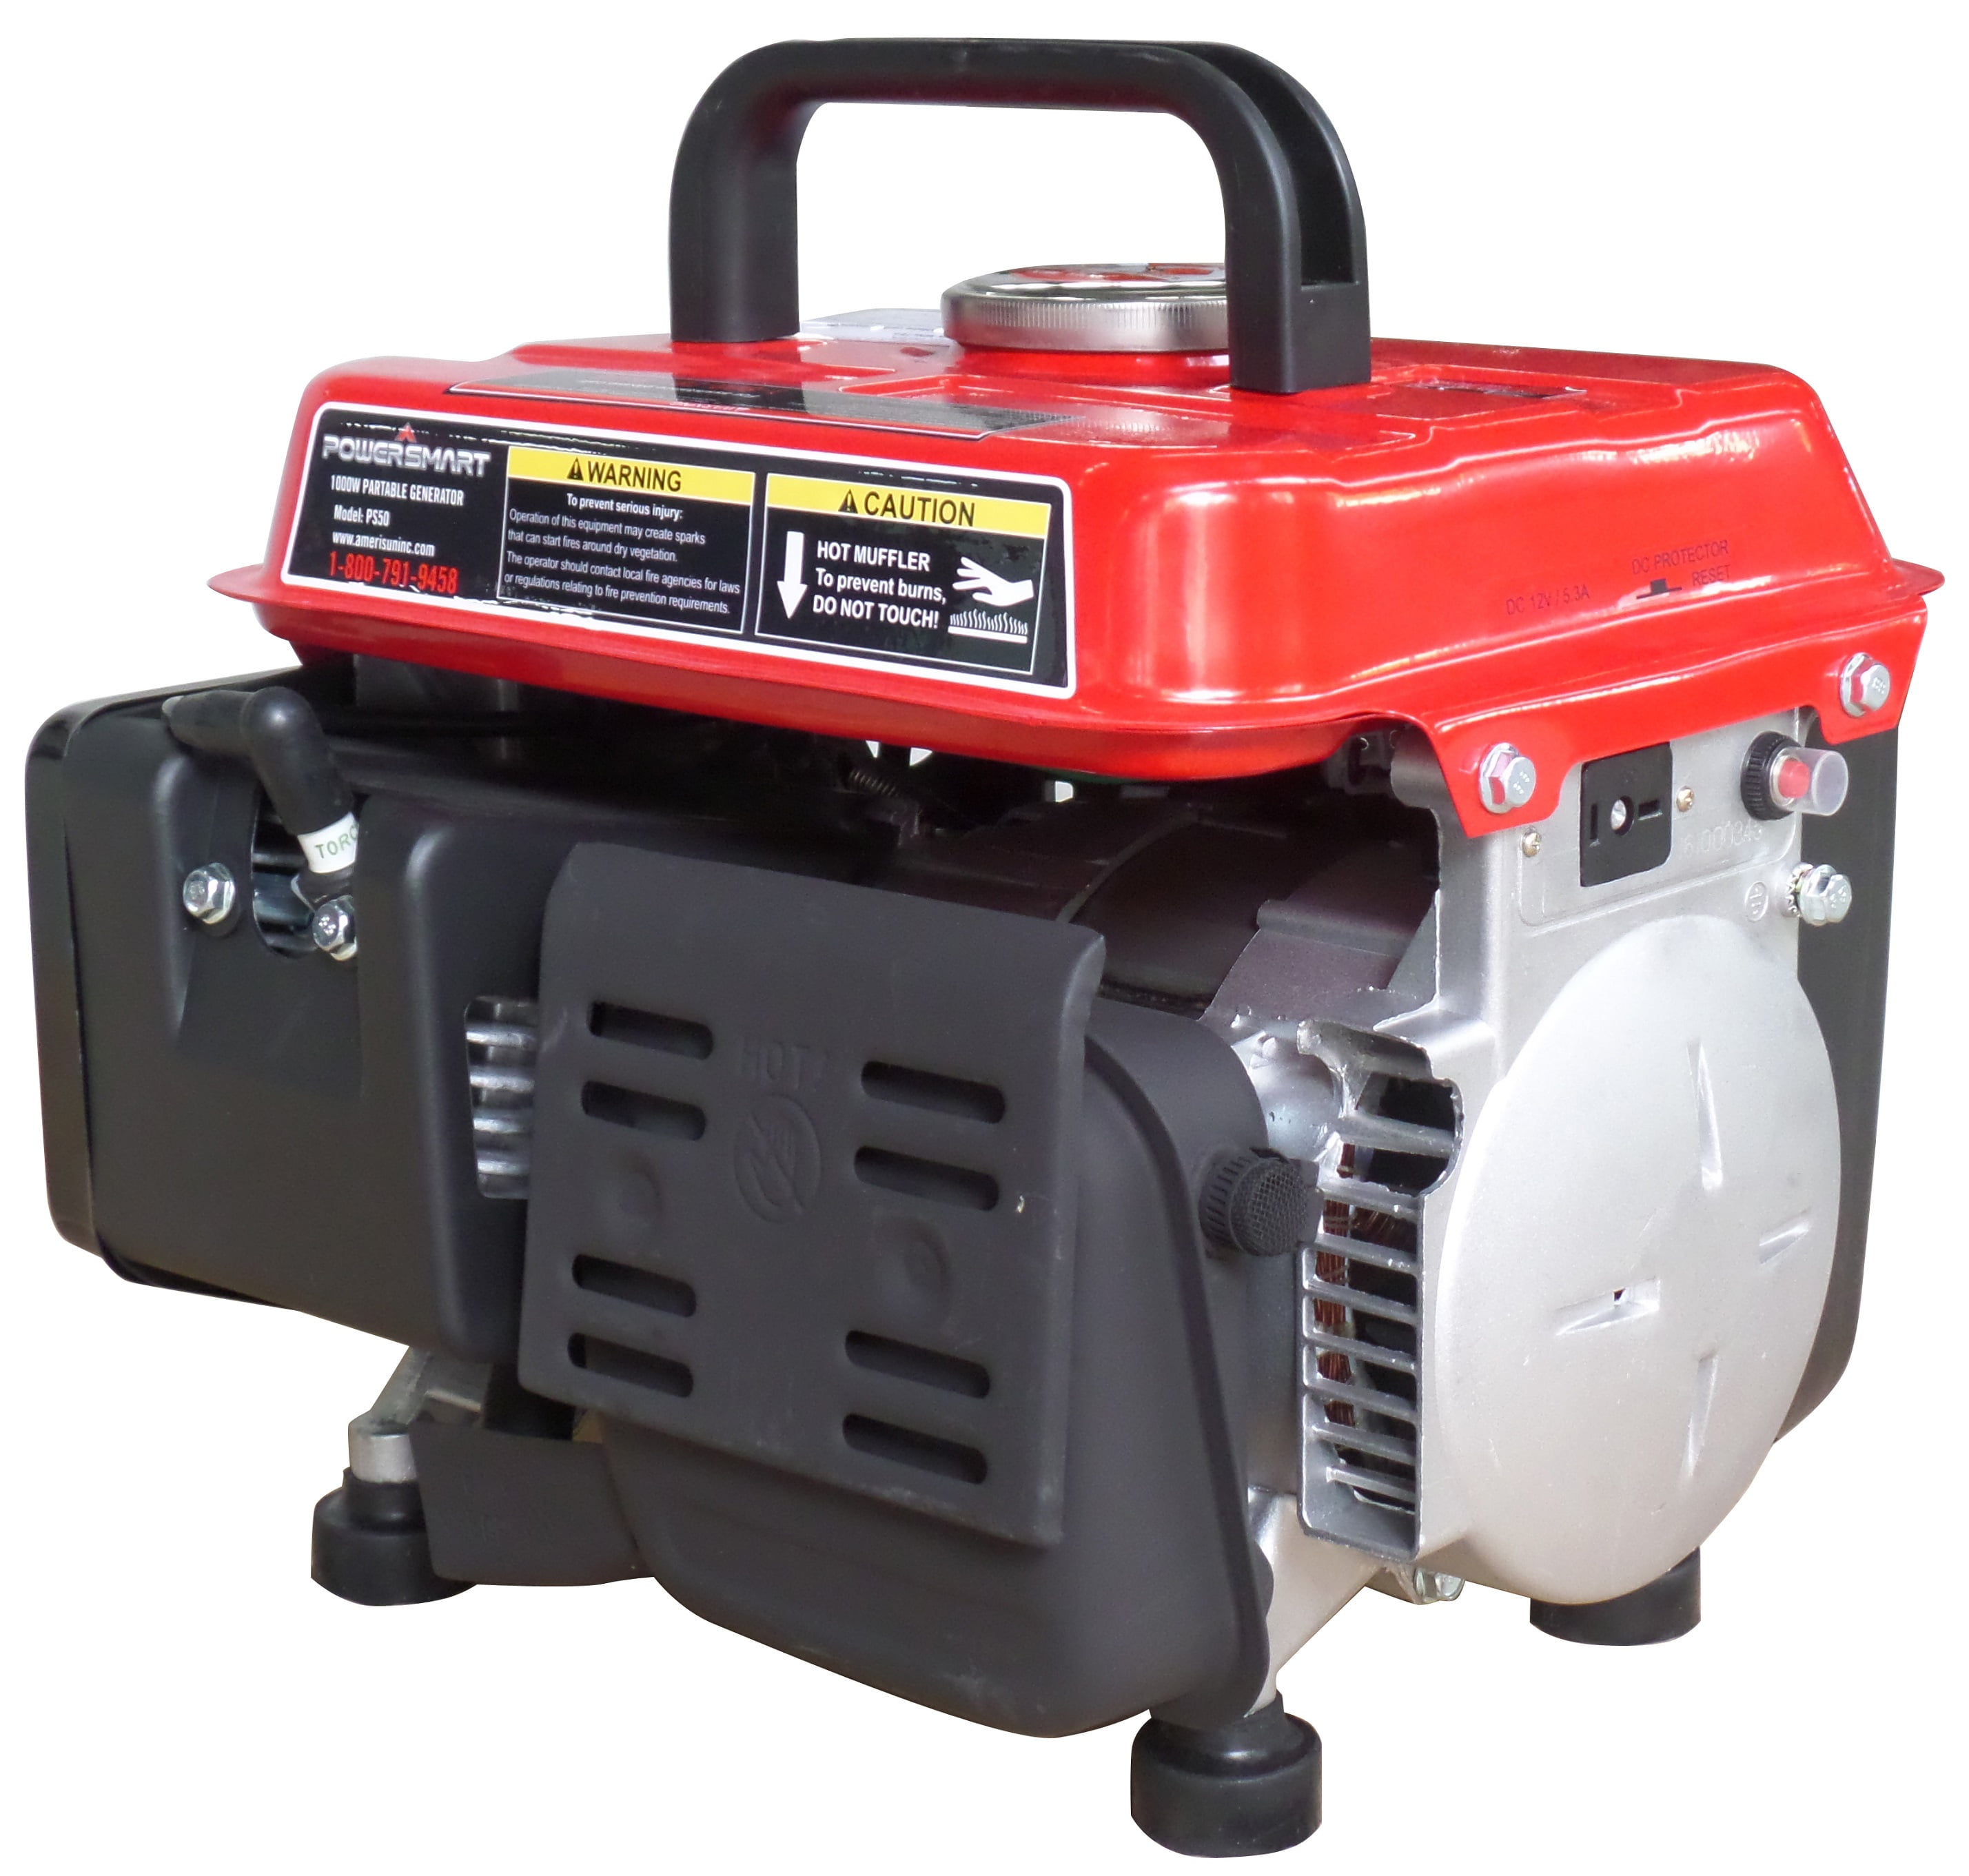 PowerSmart PS50 Portable Generator Red/Blac Pack of 1 